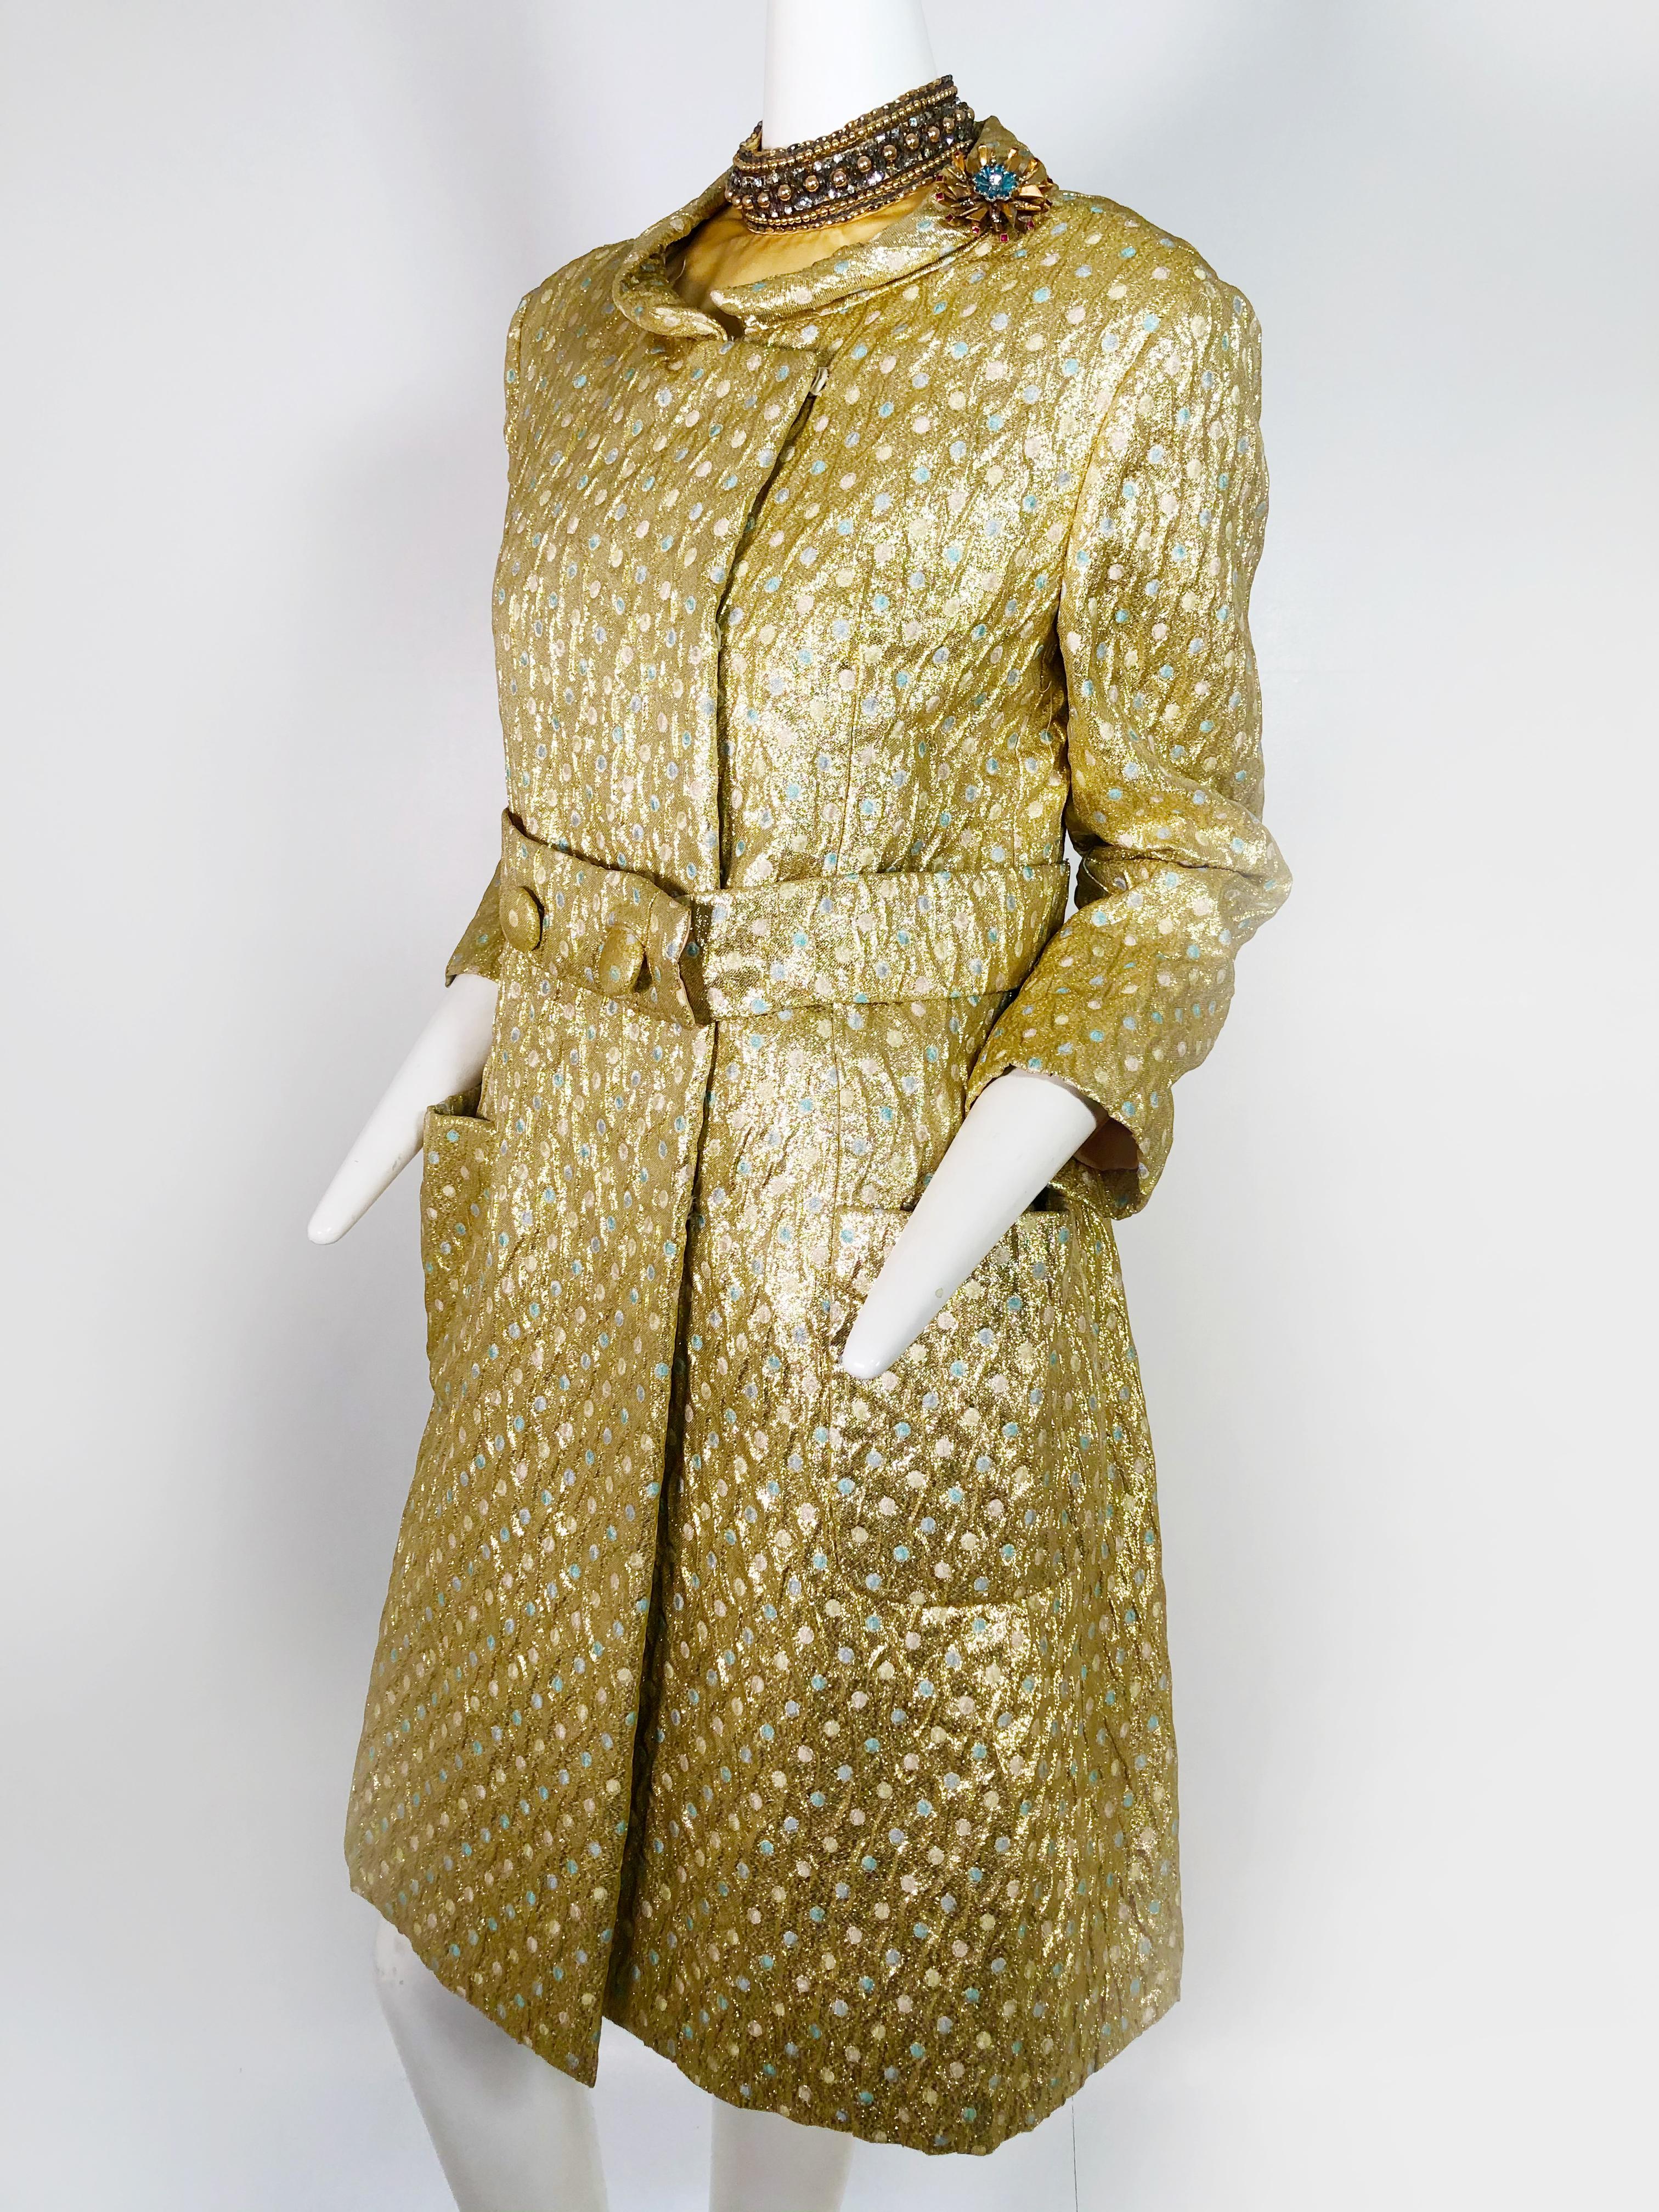 1960s Chester Weinberg gold lame and pastel brocade Mod evening coat:  Large patch pockets, Nehru collar, belt w/ covered buttons. Fully lined. Coat has brooch attached at collar, attached belt and two front patch pockets. Jacket/Dress fit a US size